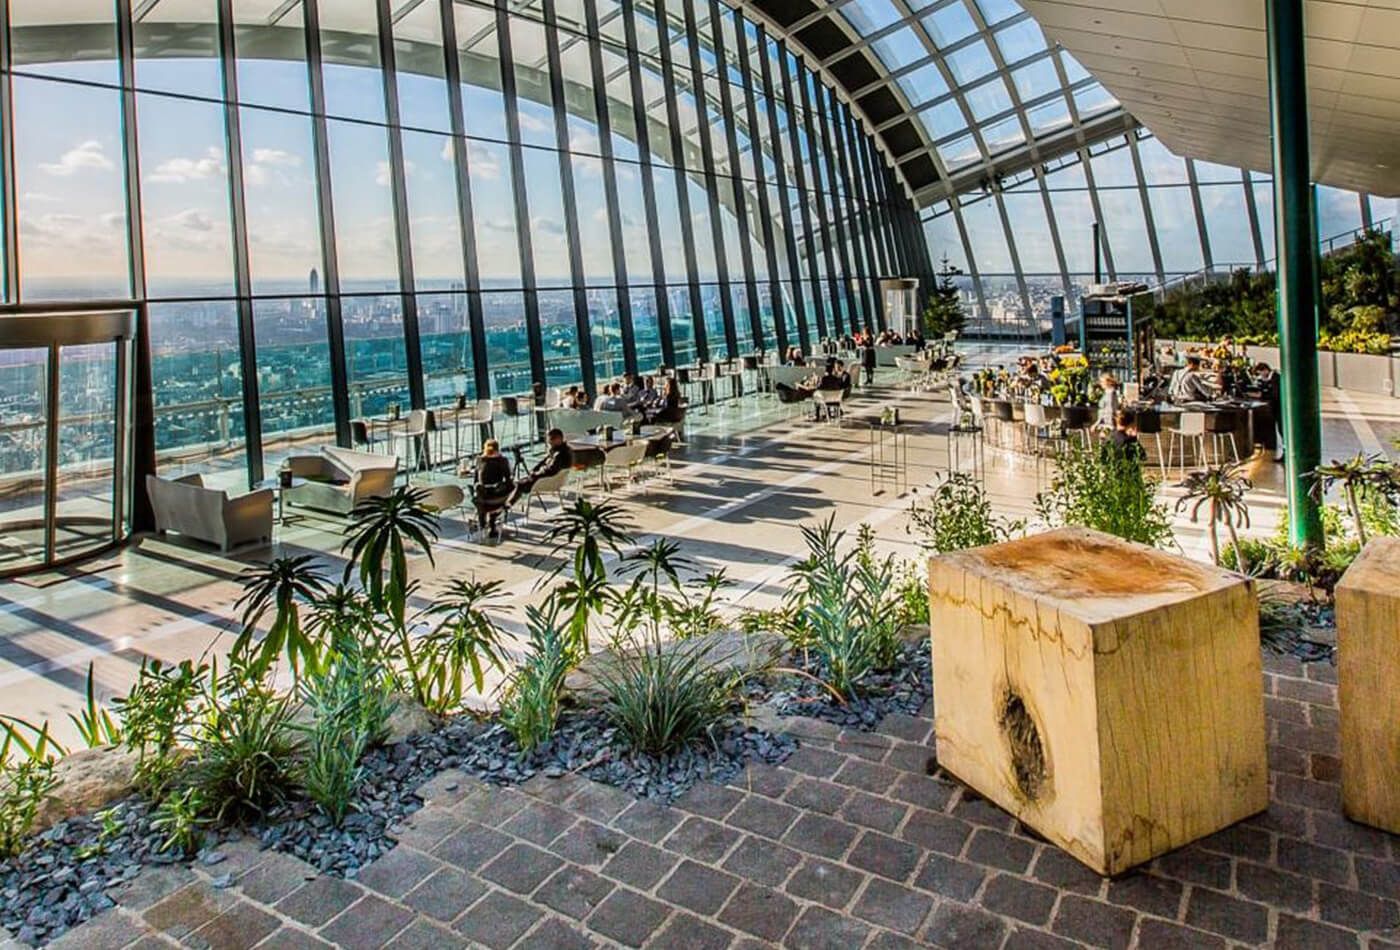  Lush greenery, seating and views of the city’s iconic skyline in the daytime.